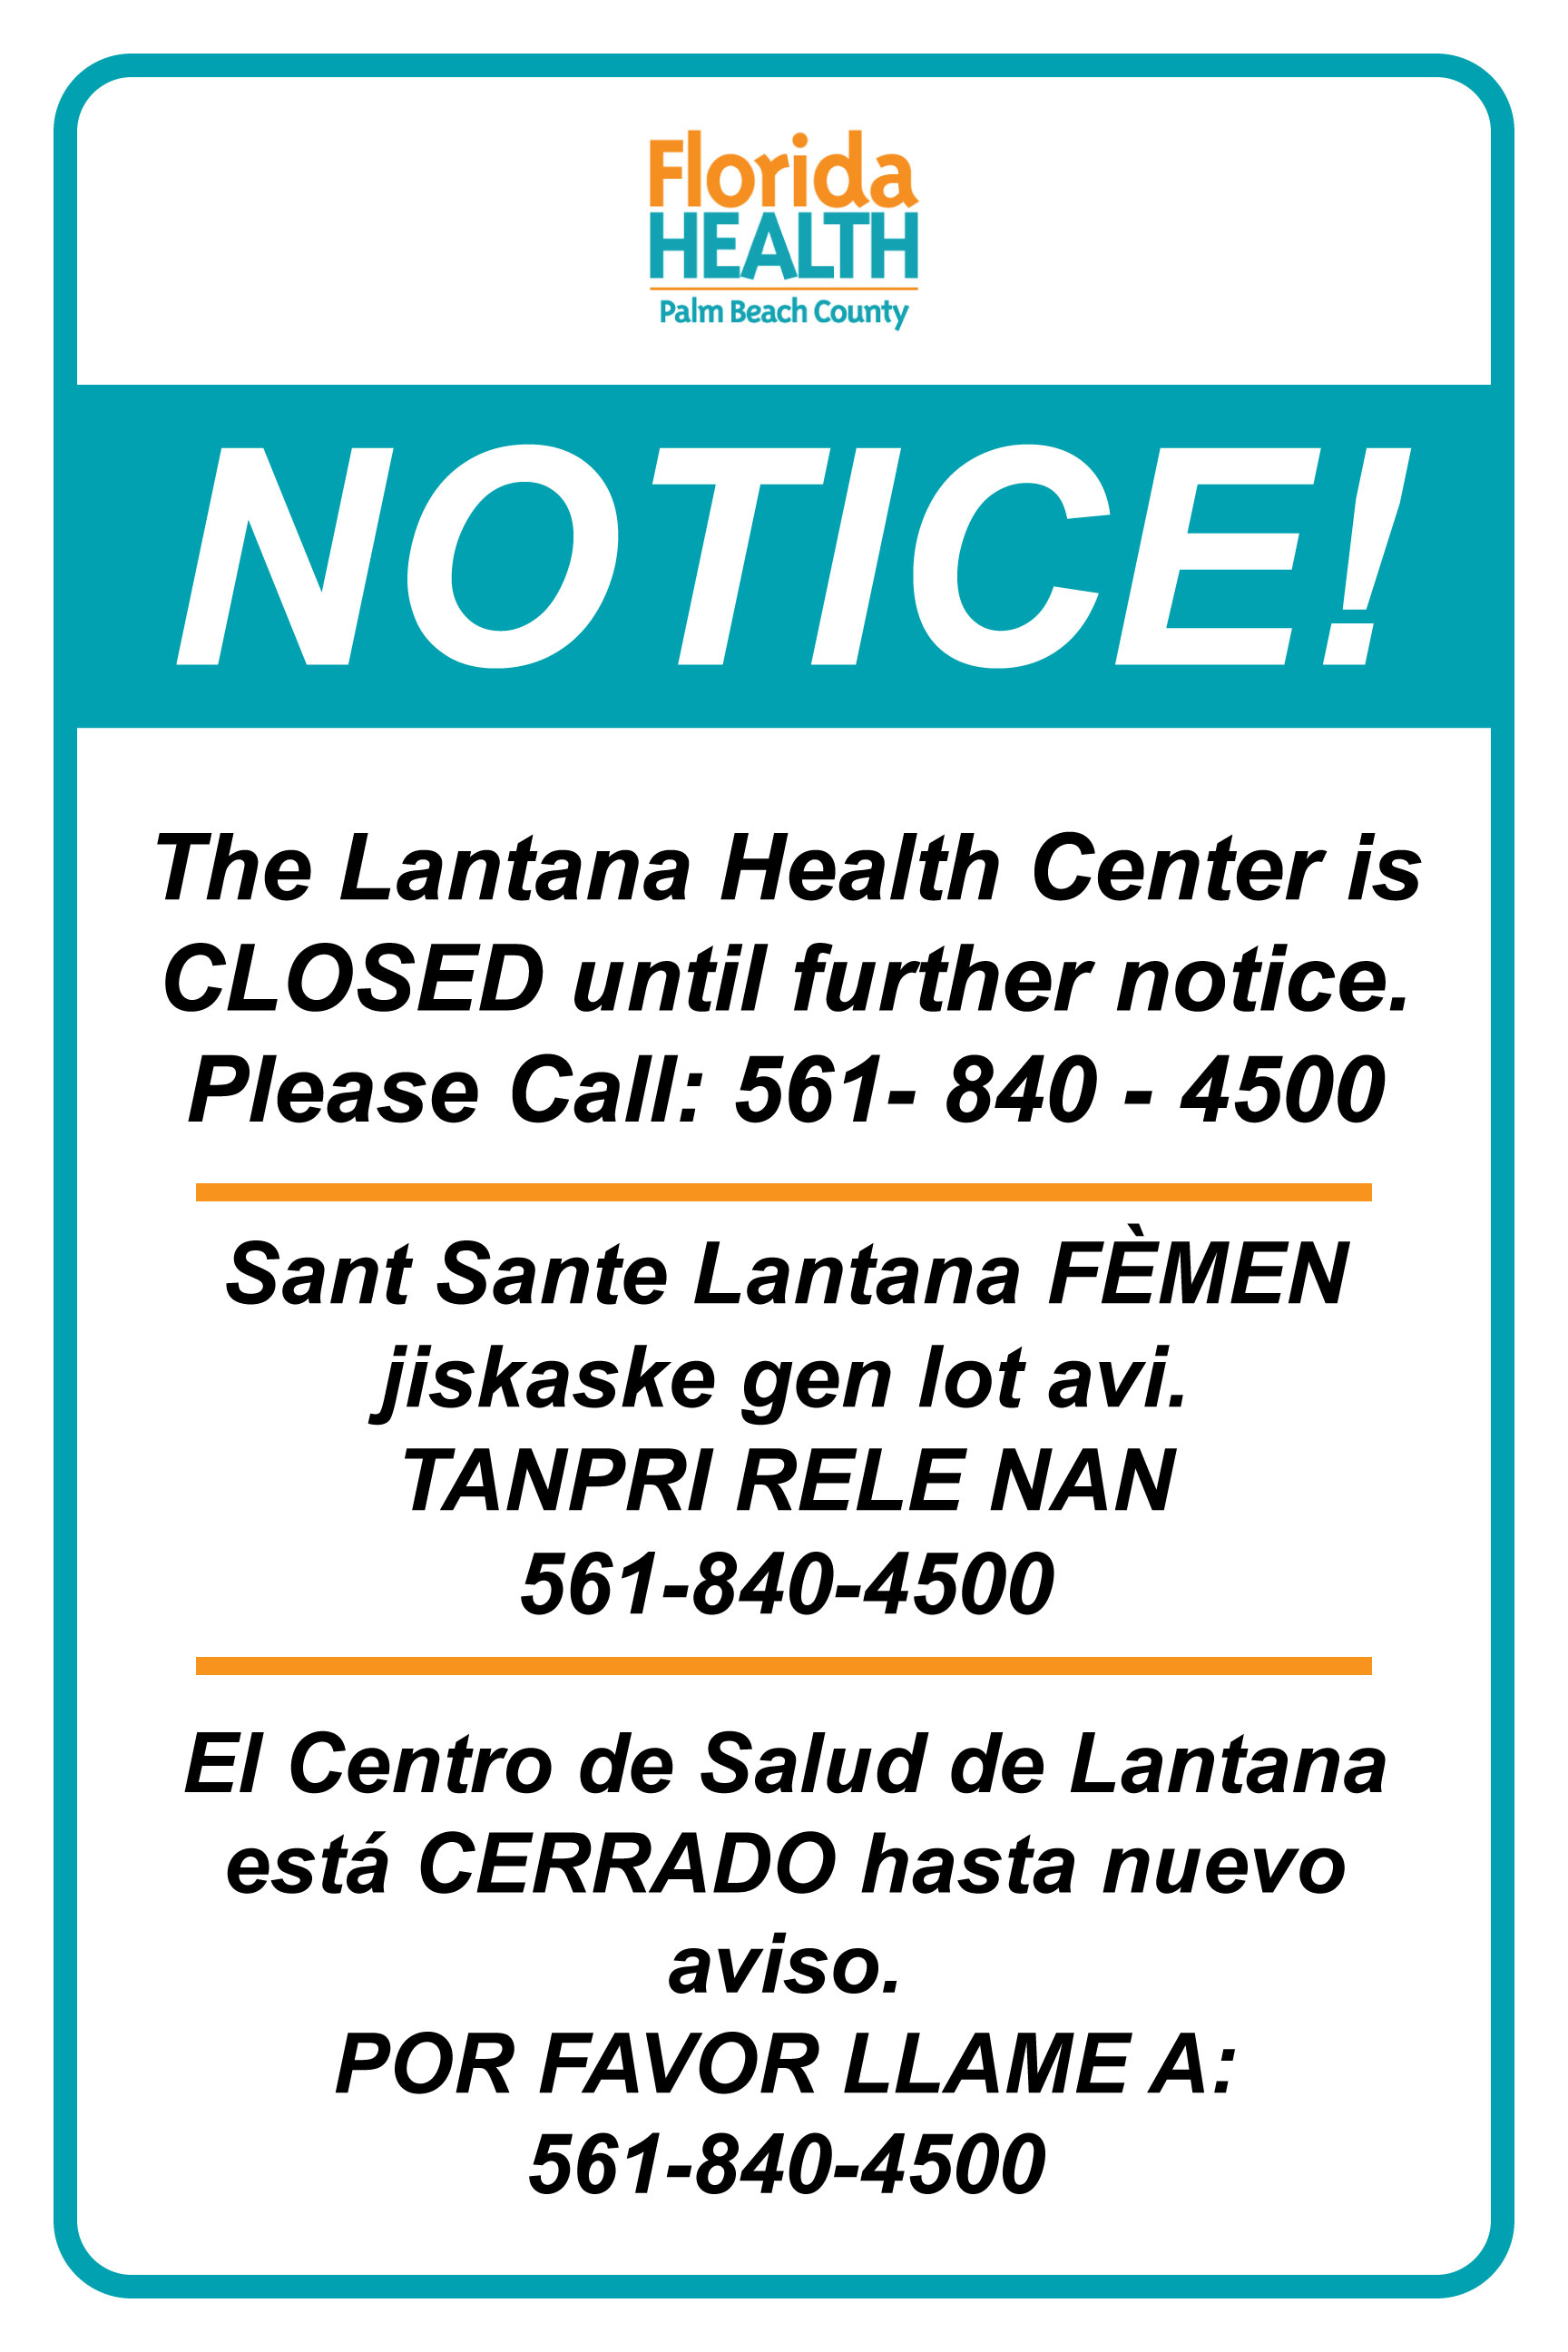 Florida Health Palm Beach County NOTICE! The Lantana Health Center is CLOSED until further notice. Please Call: 561-840-4500